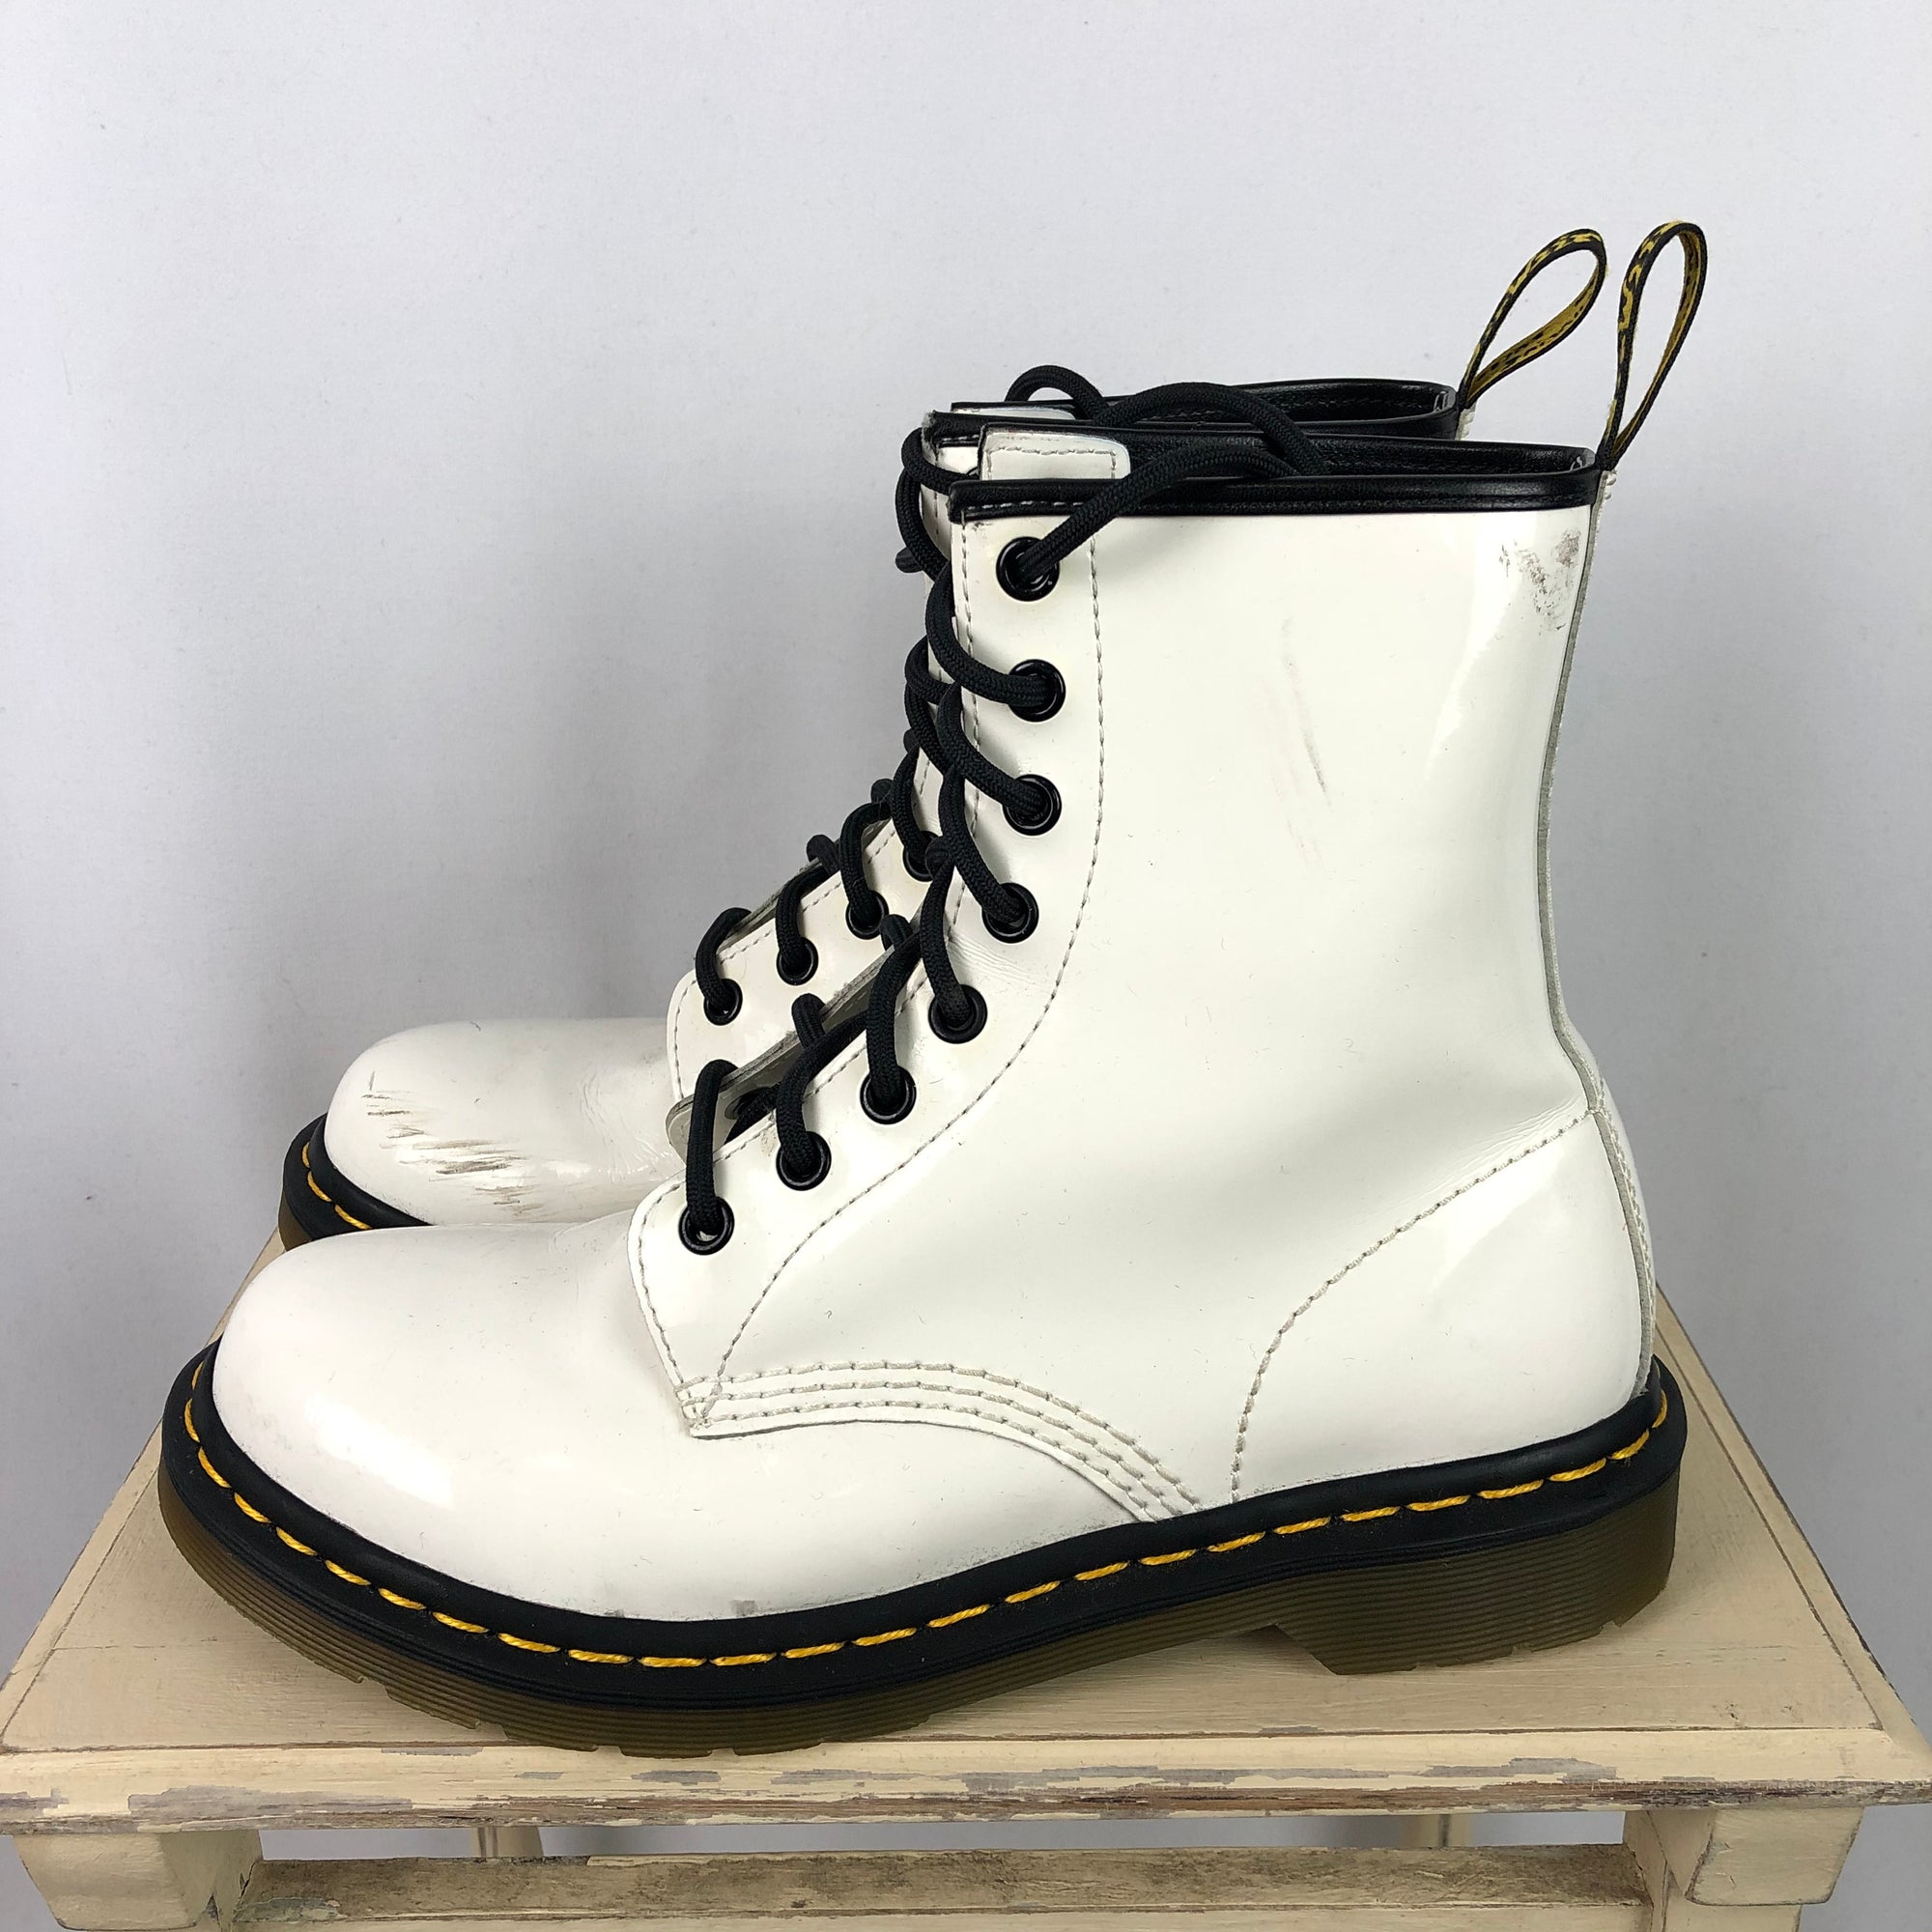 Dr Martens Patent Leather 1460 Boots in White - UK6/EU39